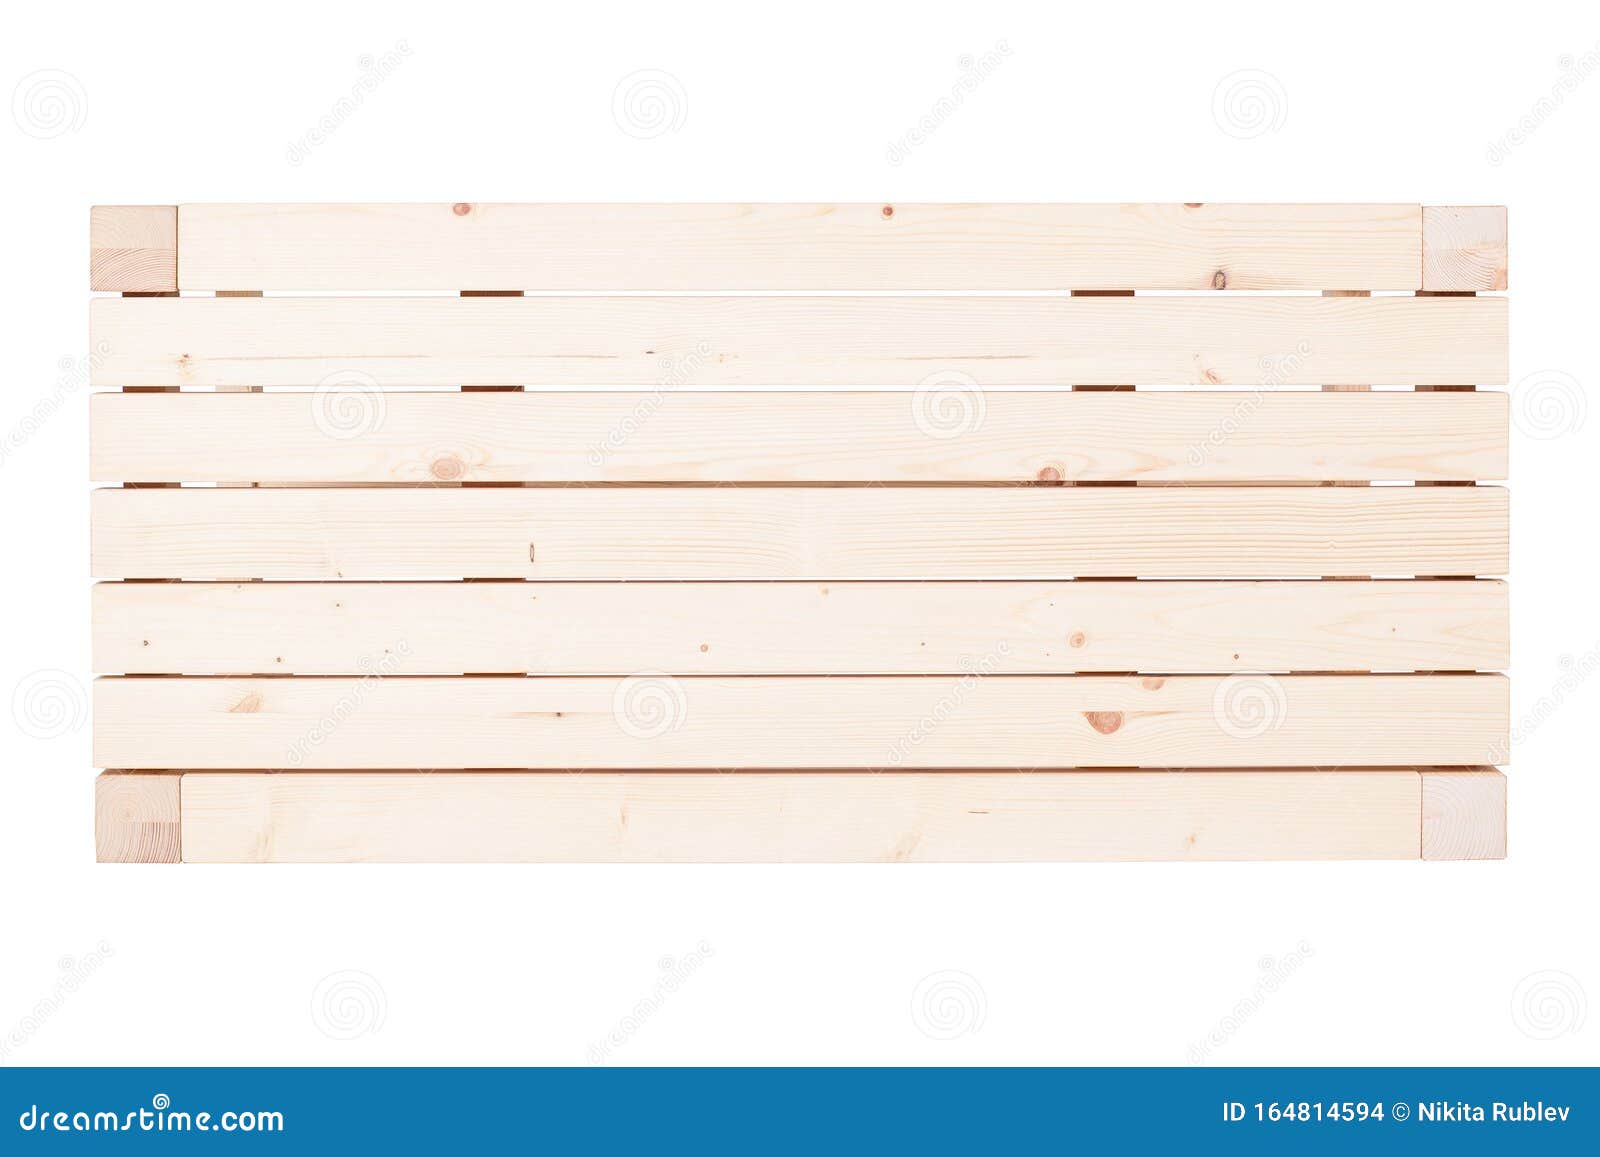 Empty Wood Desk Surface Background Wood Texture Isolated On White